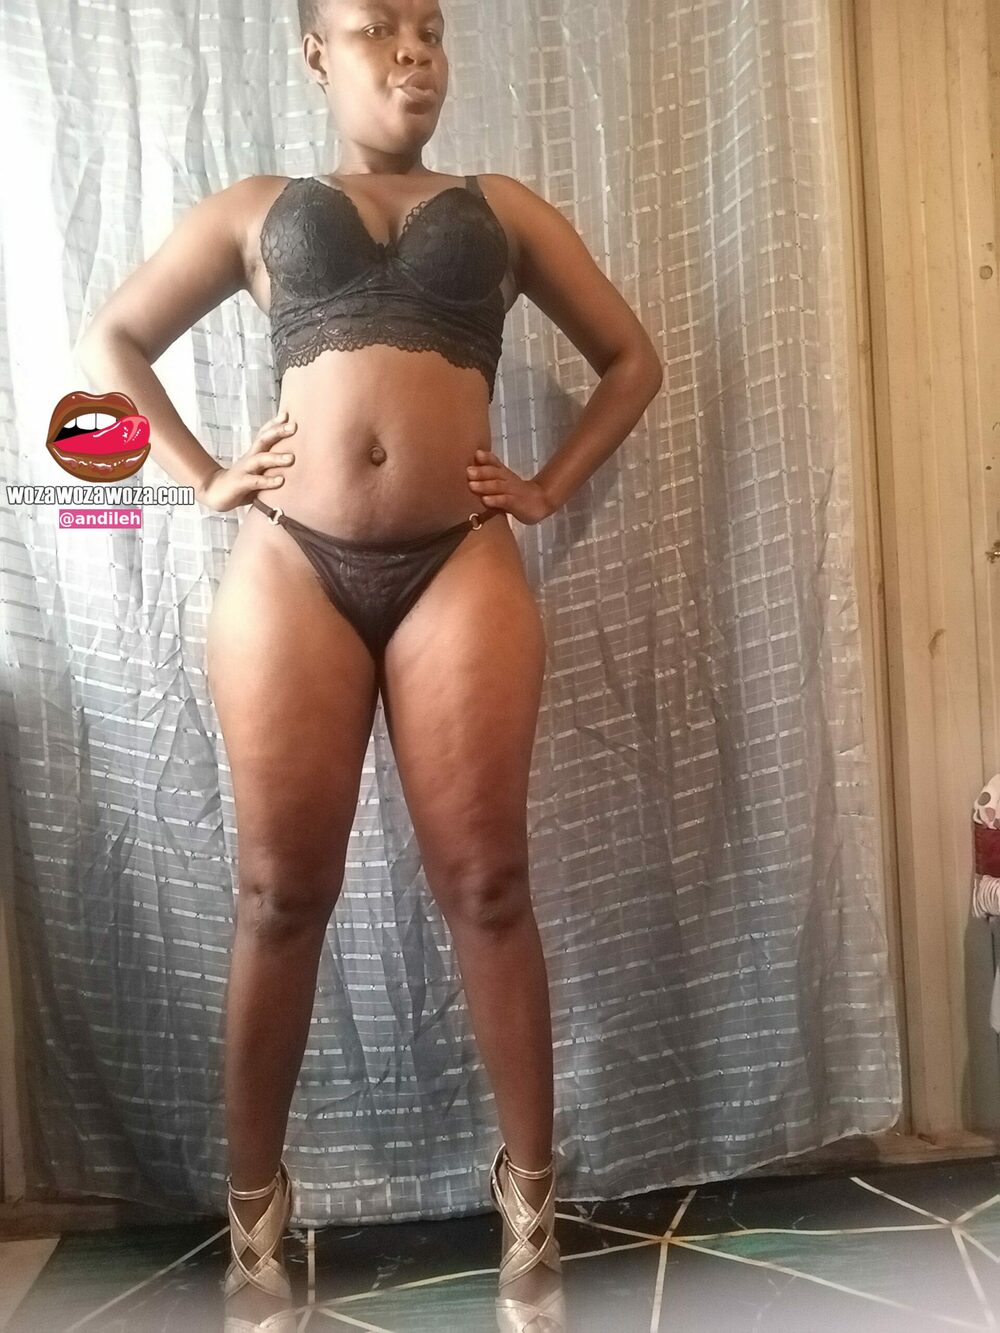 andileh Straight Female escort in Soweto, South Africa public photo post